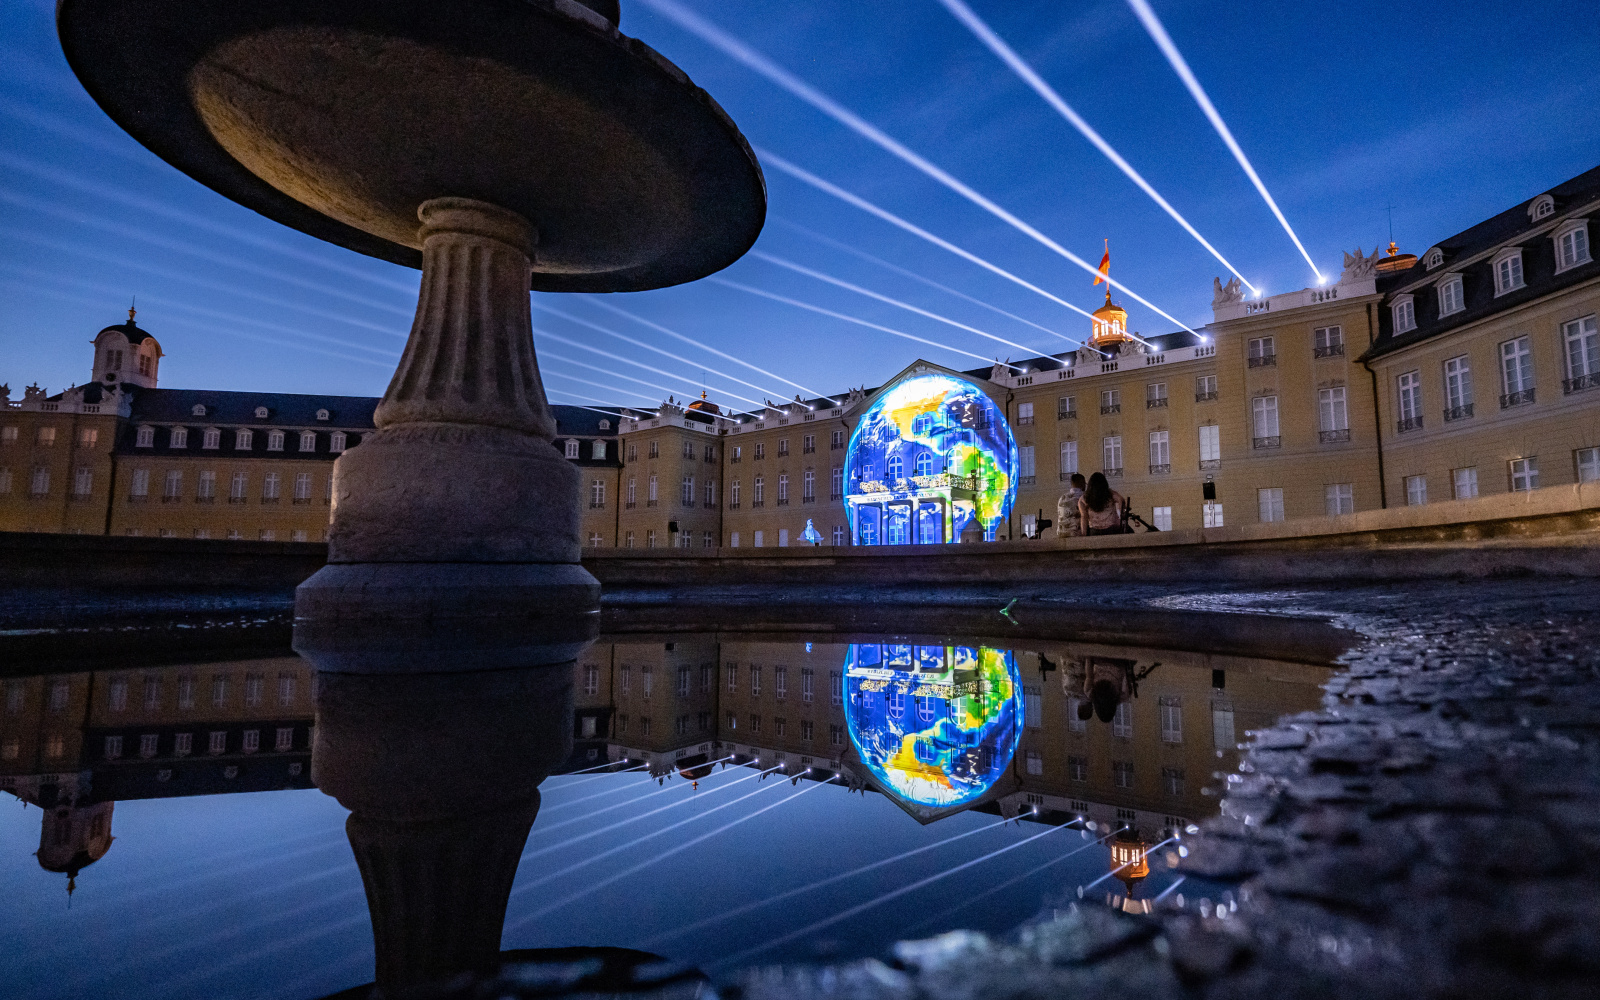 You can see the illuminated facade of the Karlsruhe Baroque Palace, in the center of which is a globe.